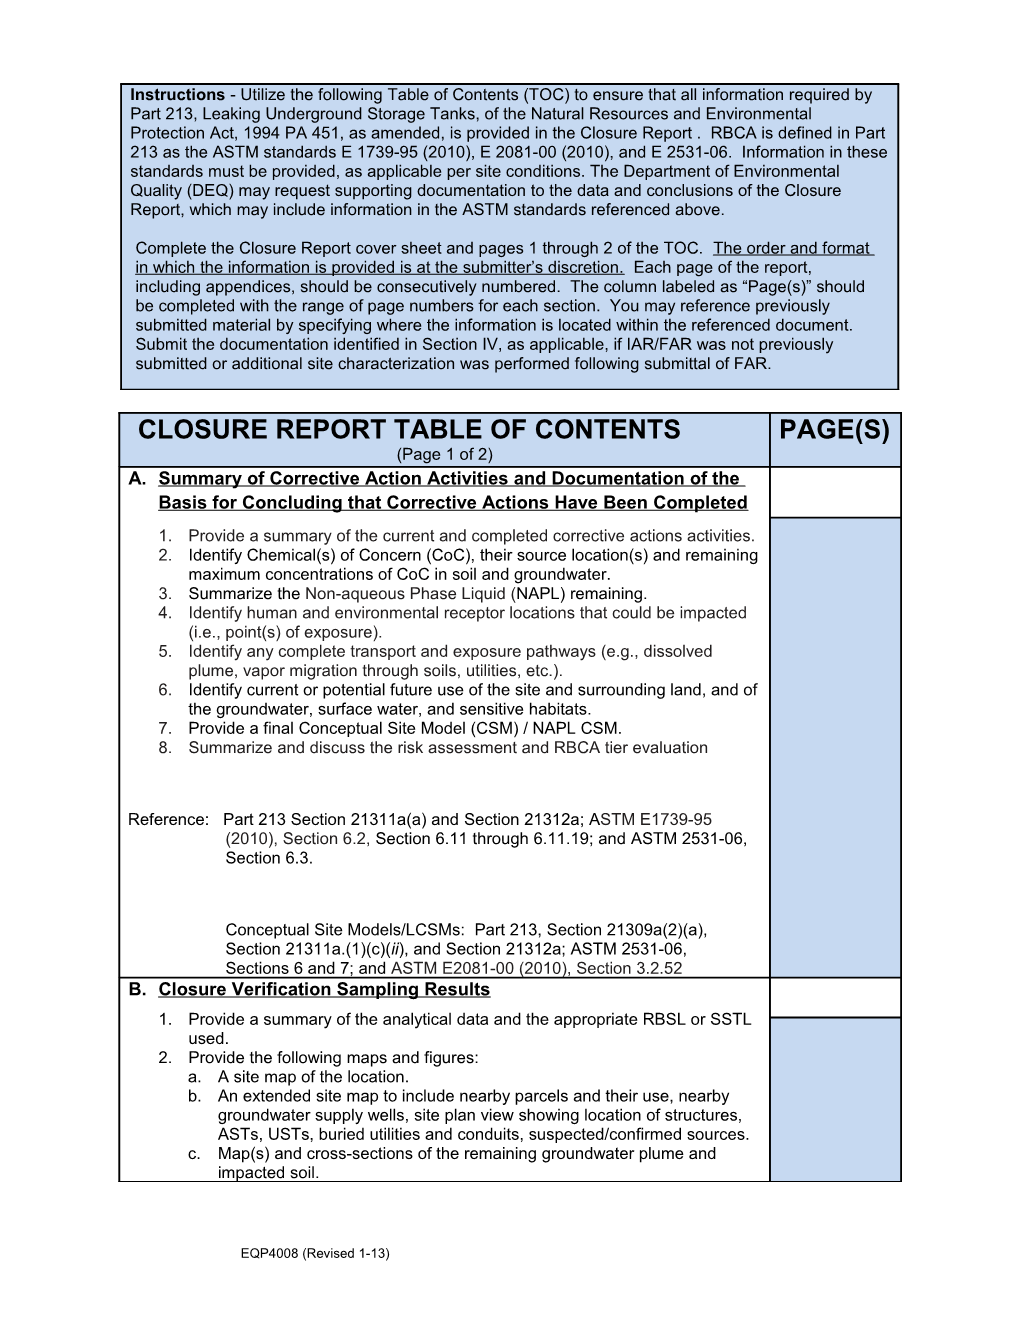 Closure Report Table of Contents Form